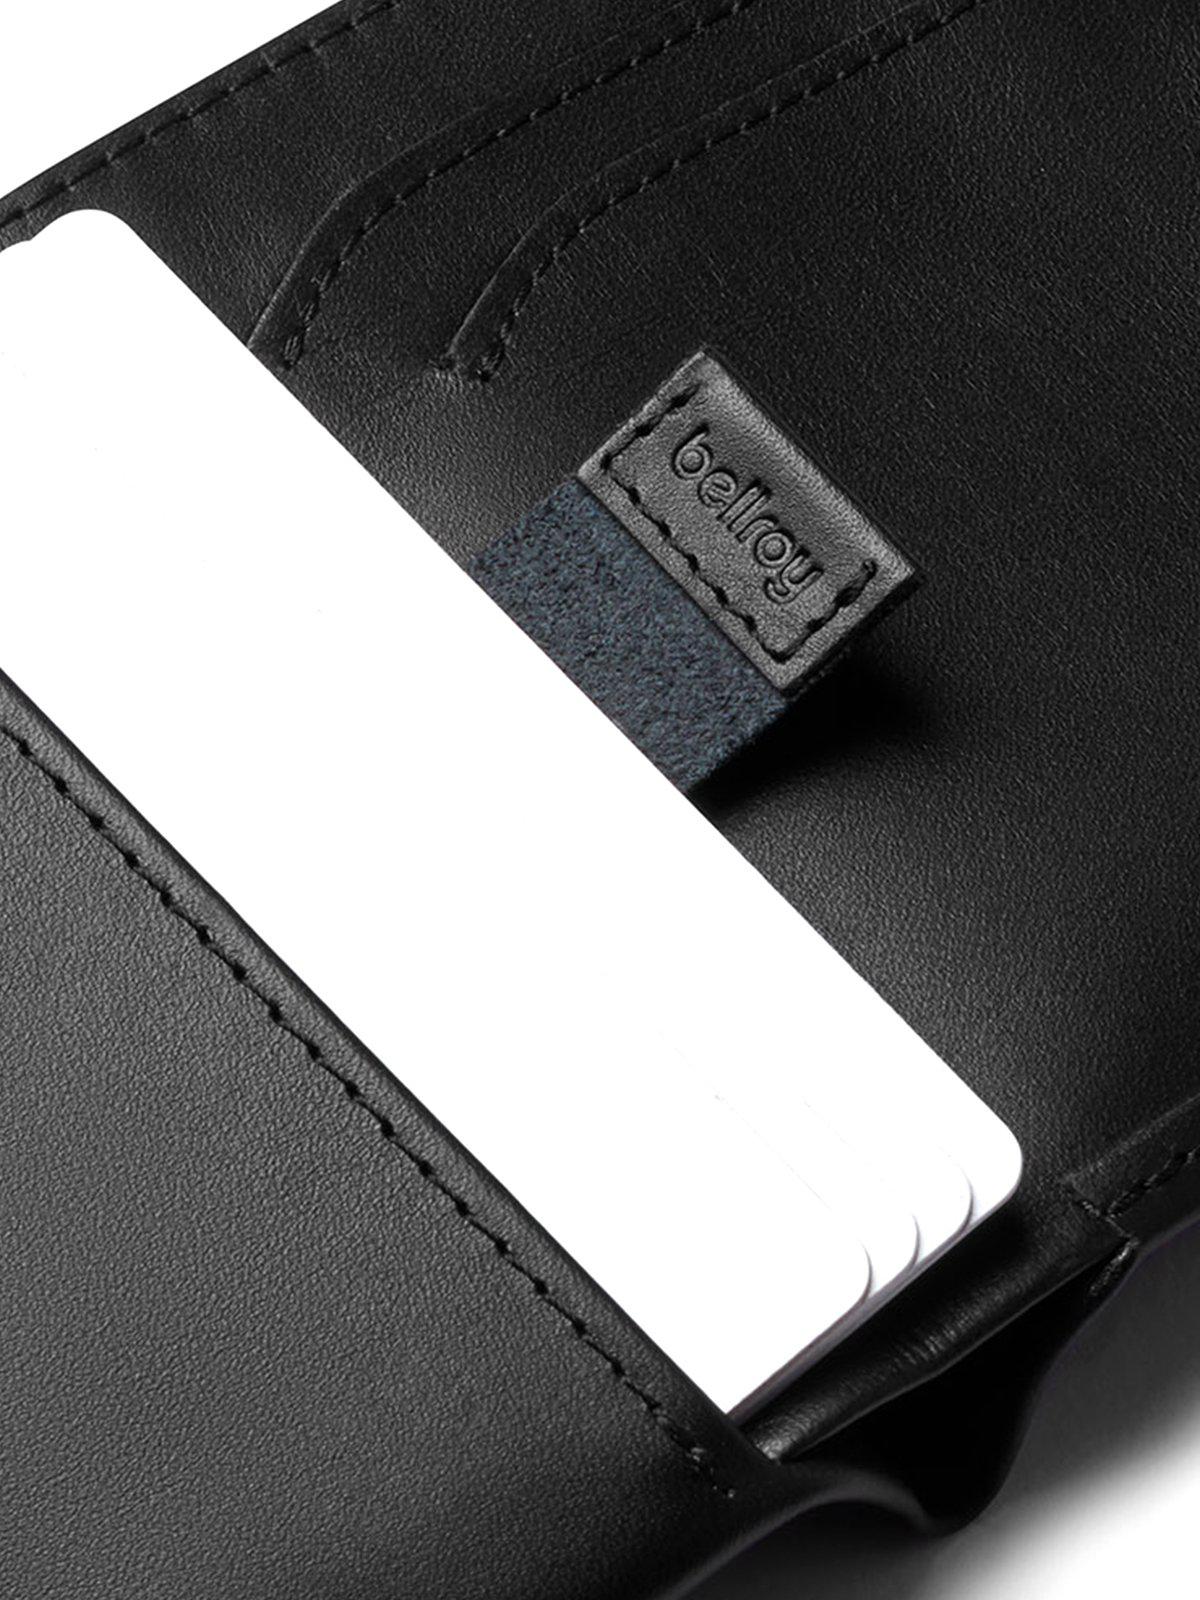 Bellroy Note Sleeve Wallet Black RFID - MORE by Morello Indonesia